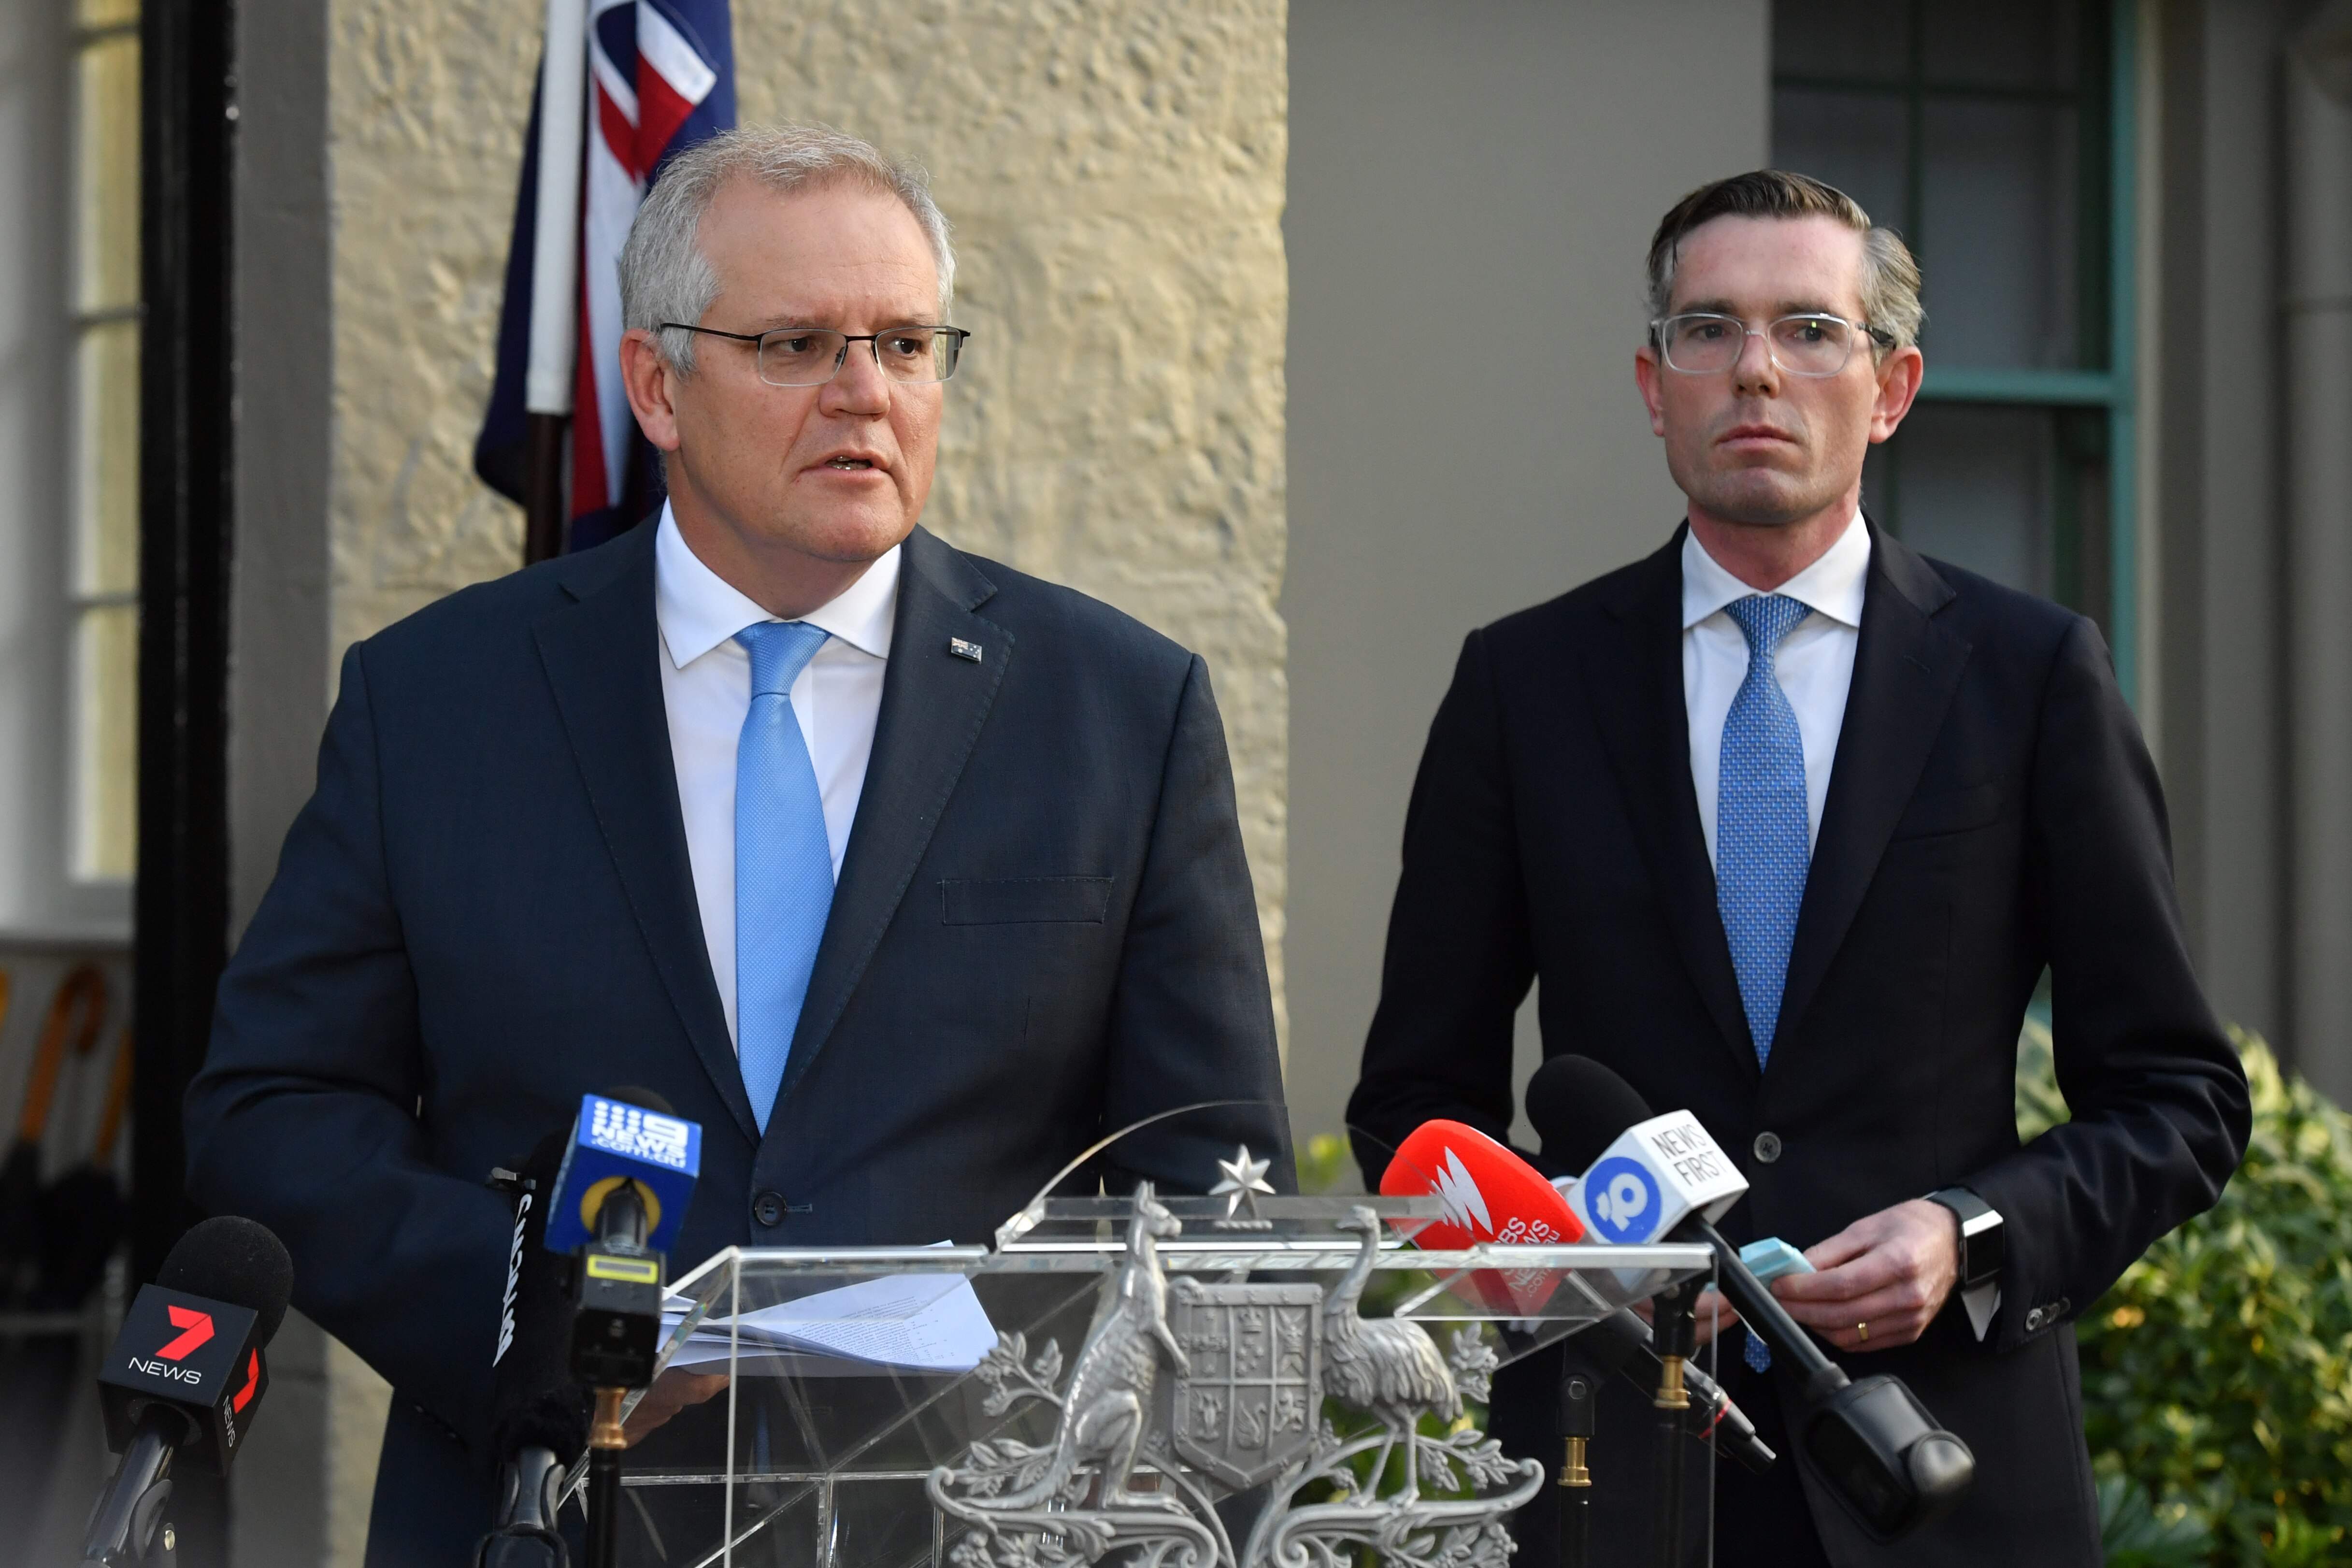 Scott Morrison and Dominic Perrottet during the announcement of a Covid-19 financial support package.